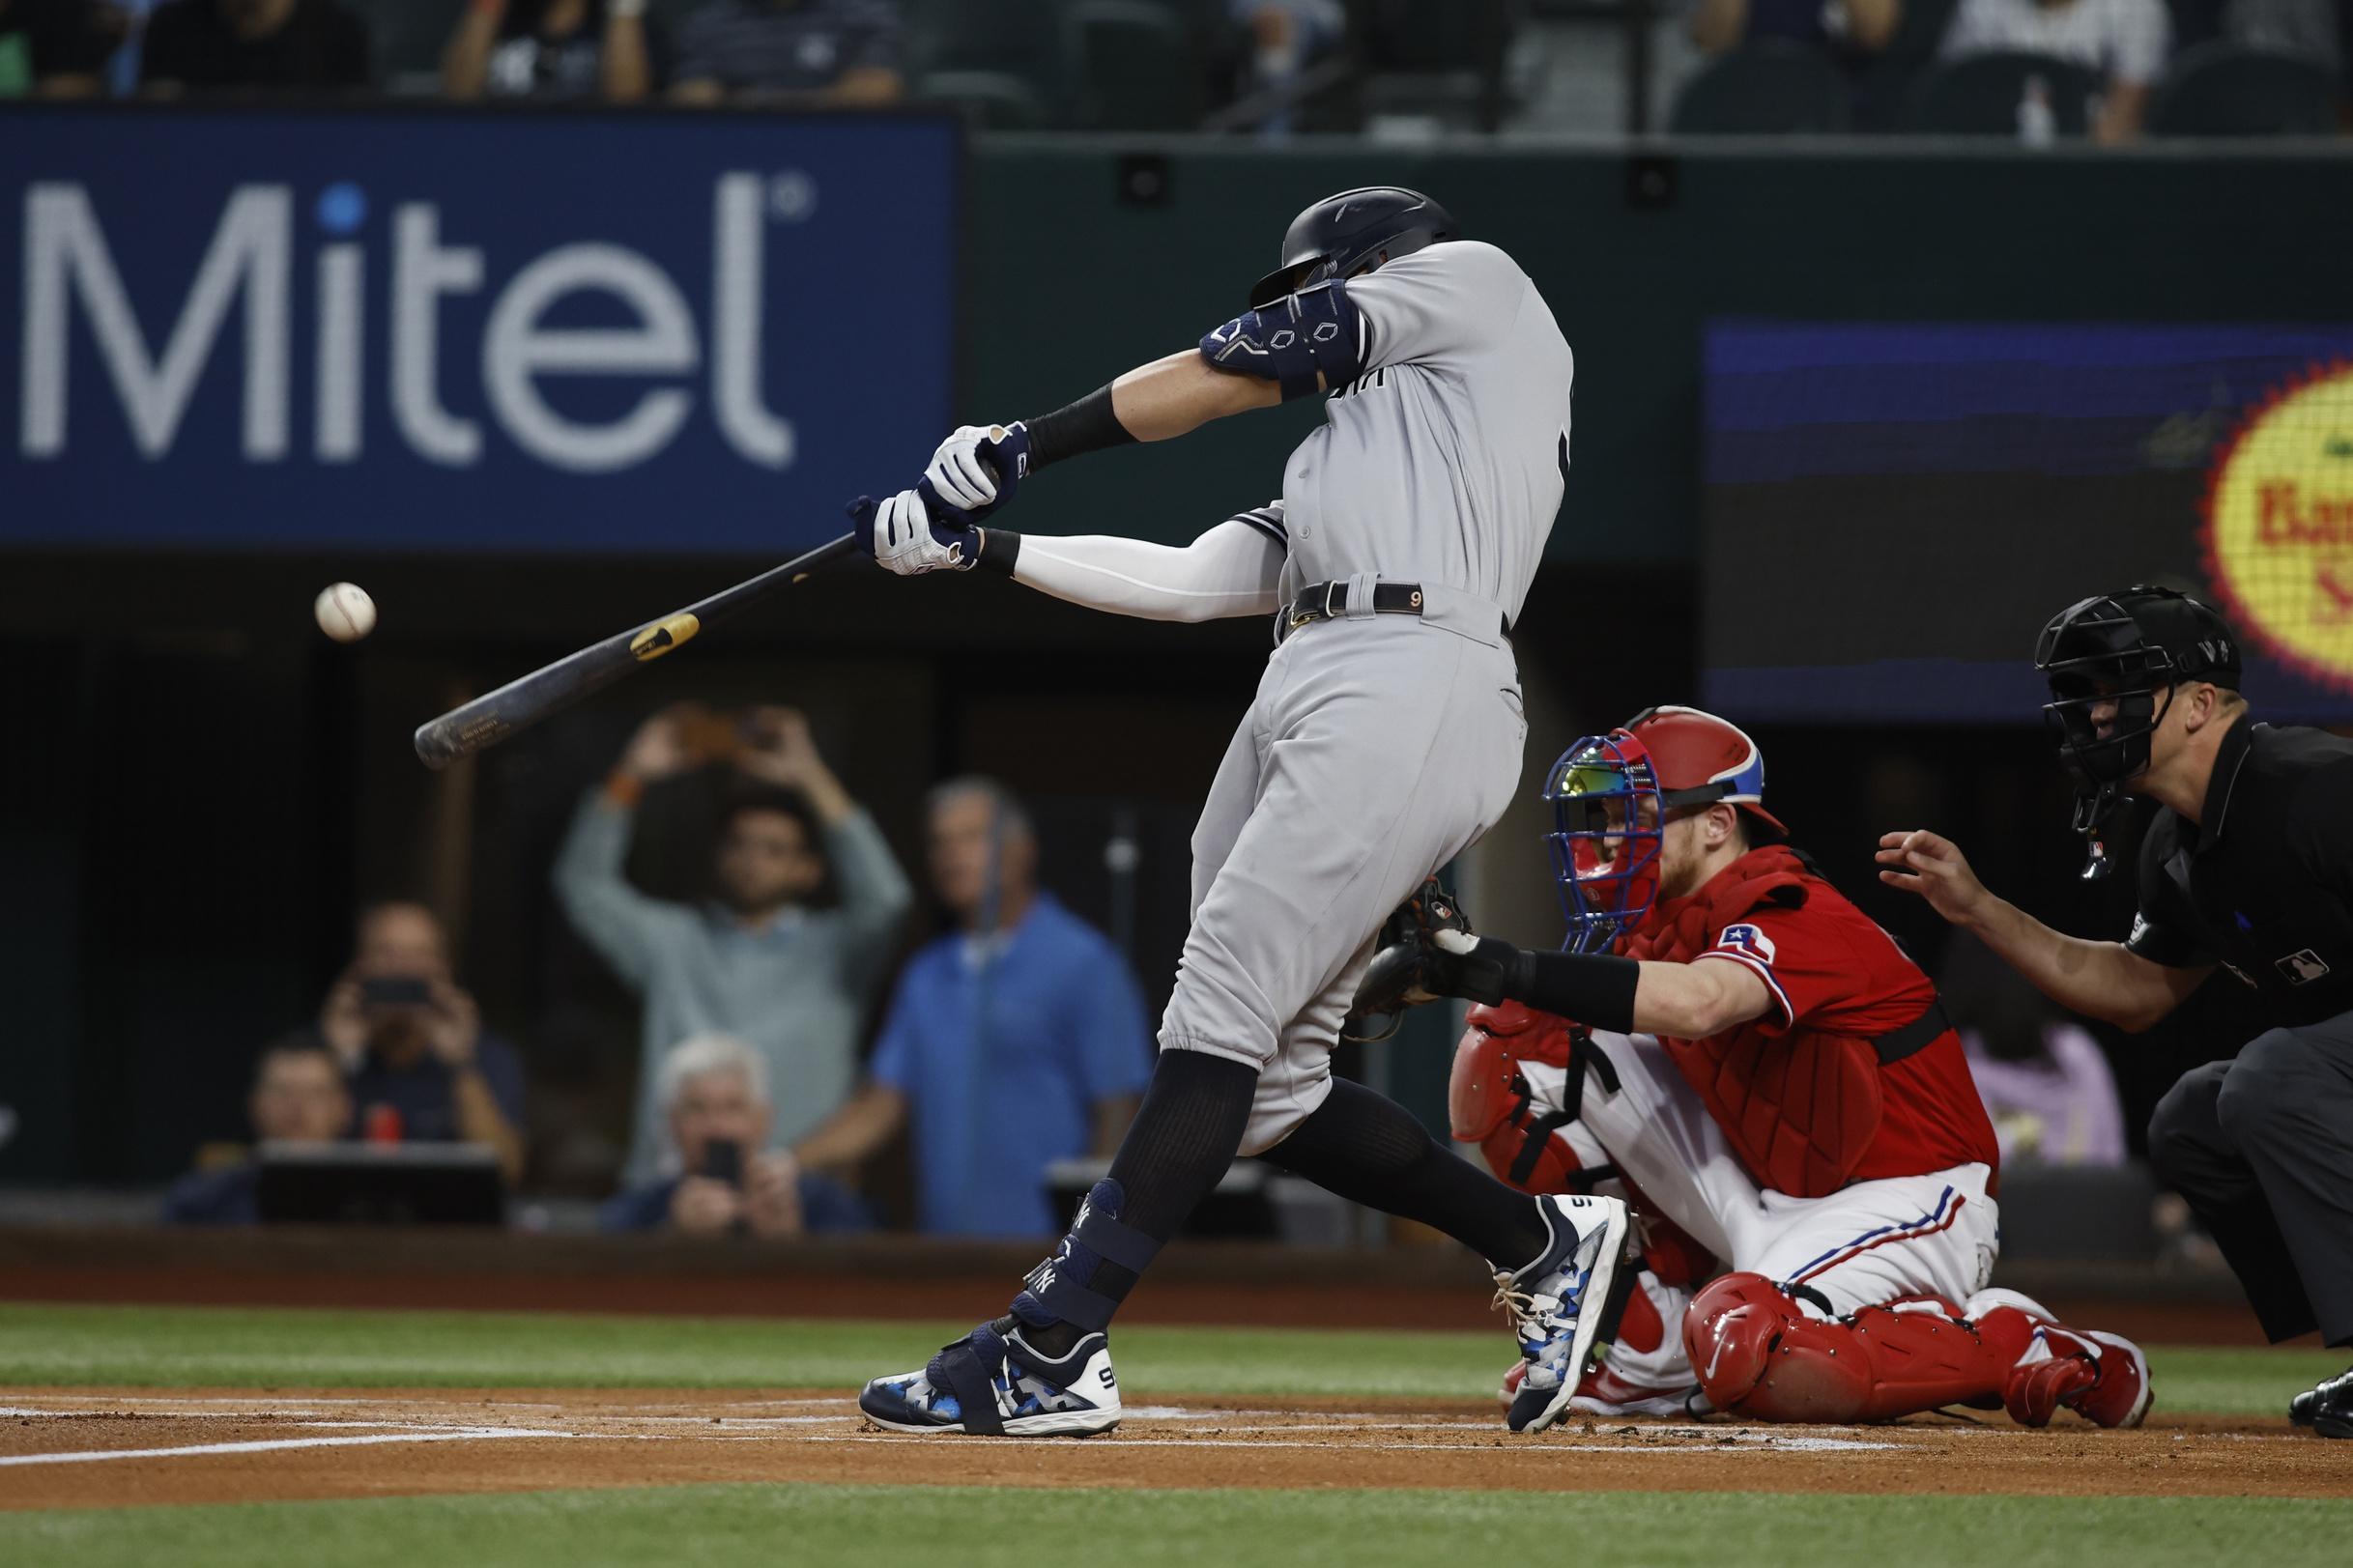 New York Yankees right fielder Aaron Judge (99) hits his 62nd home run to break the American League home run record in the first inning against the Texas Rangers at Globe Life Field. / Tim Heitman-USA TODAY Sports